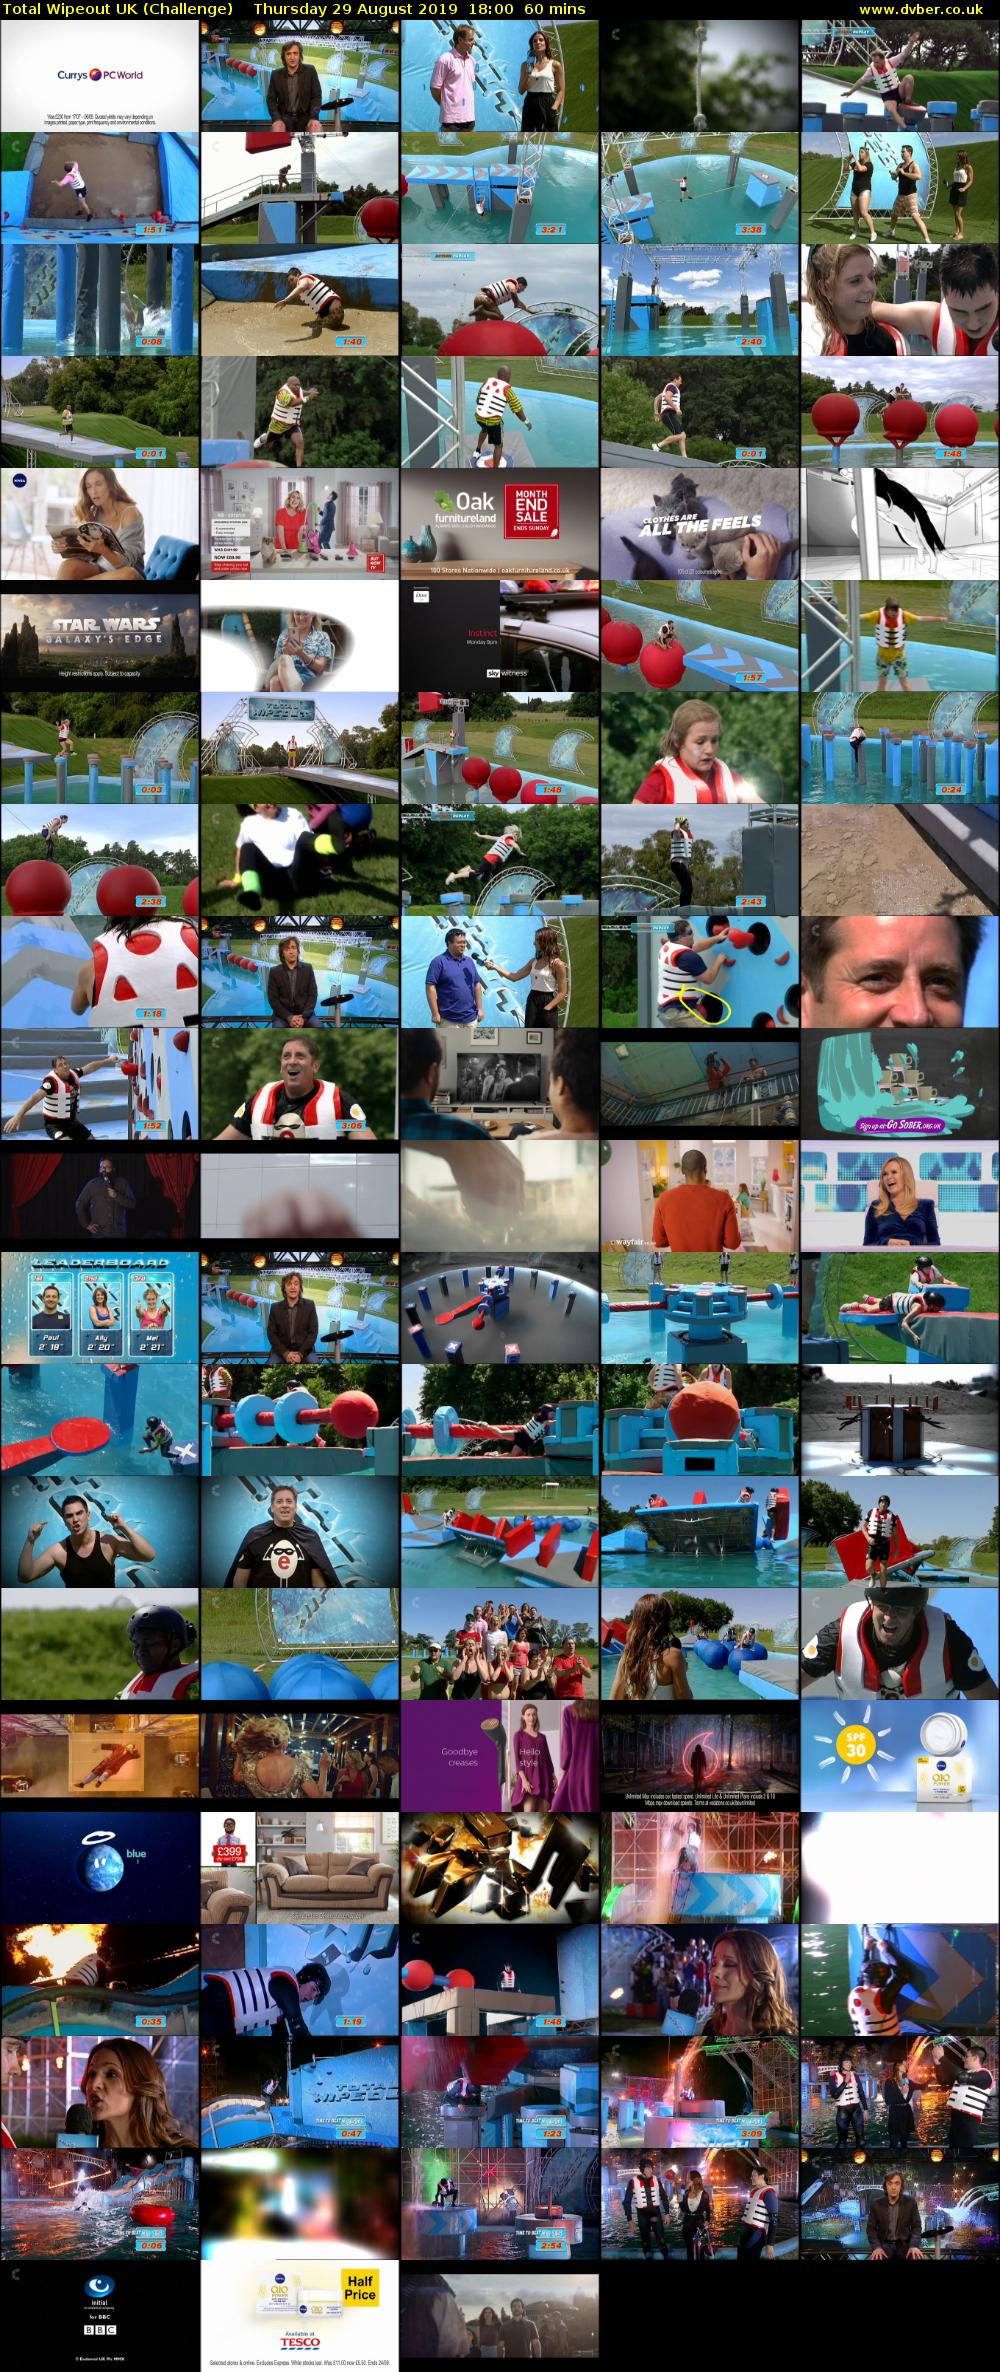 Total Wipeout UK (Challenge) Thursday 29 August 2019 18:00 - 19:00